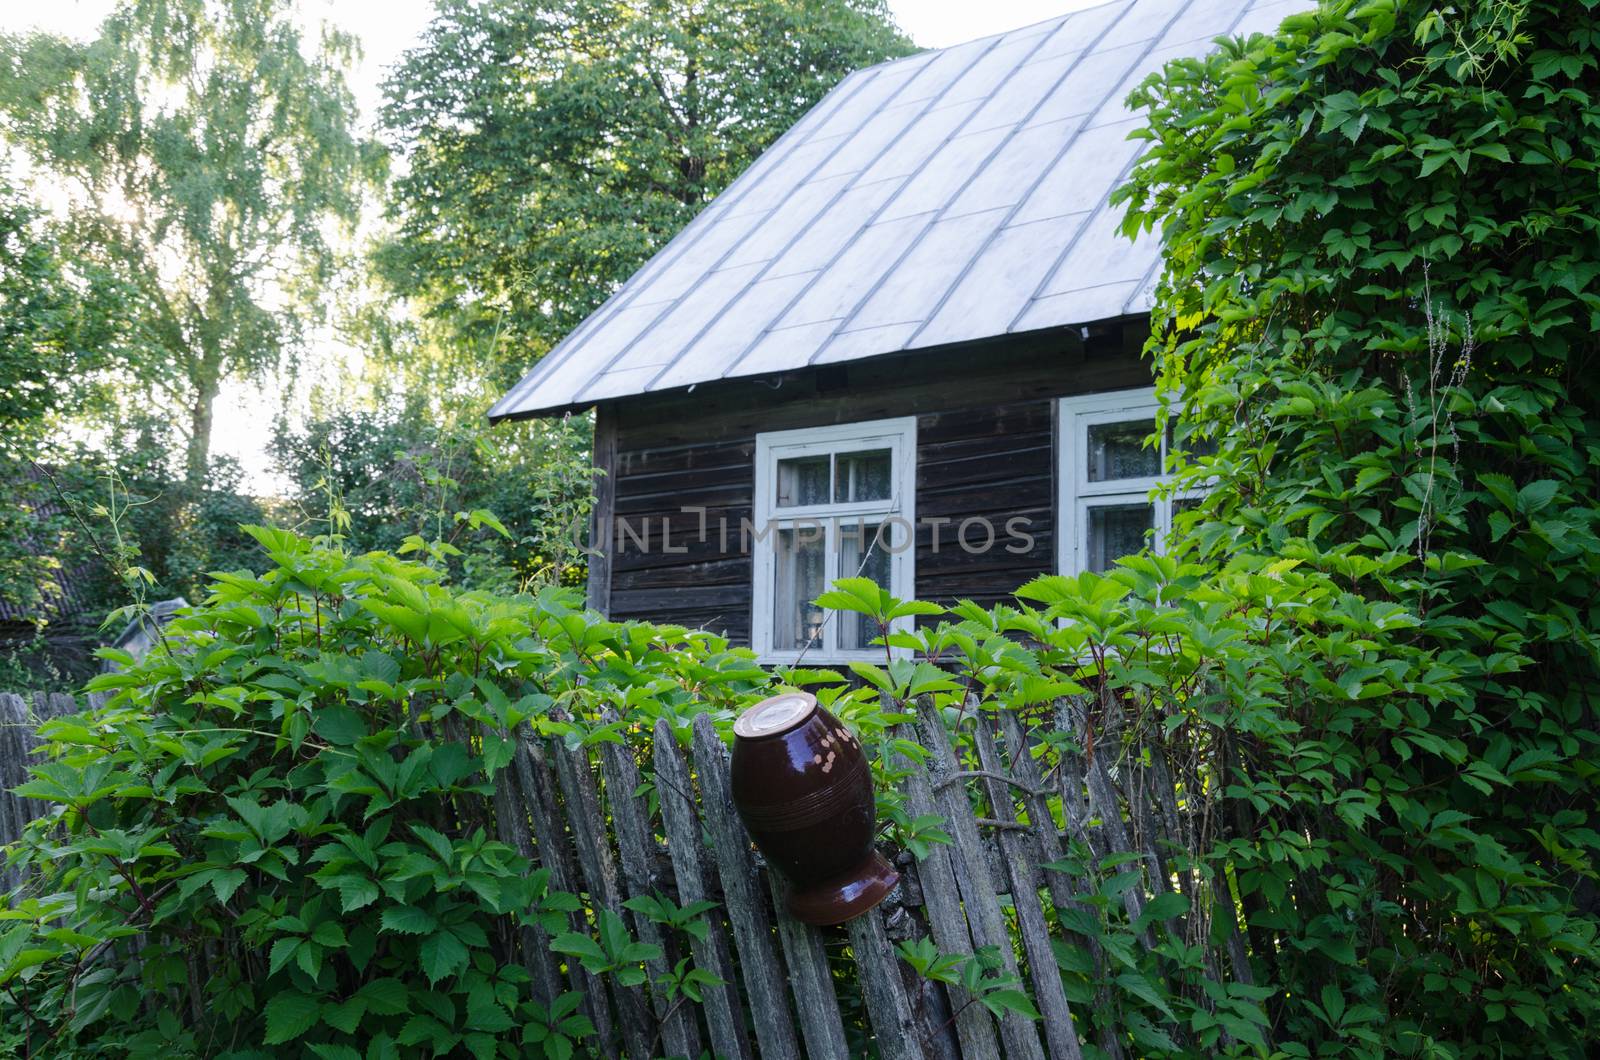 old country style house with windows and wooden fence with clay jug